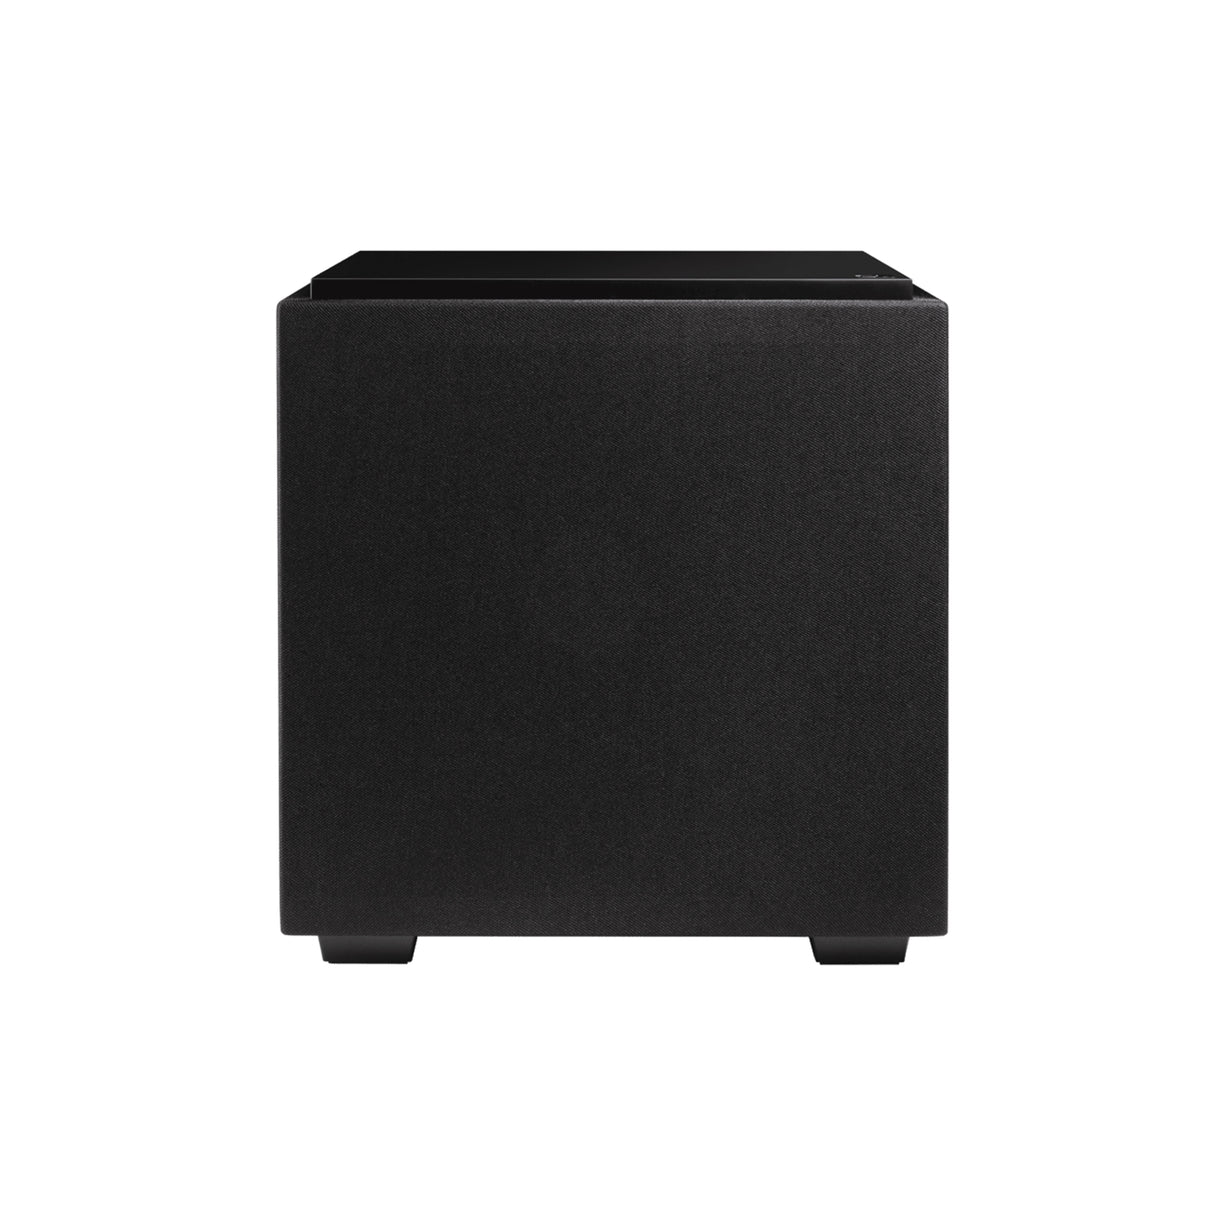 Defintive Technology Descend DN15 - 15 Inches Powered Subwoofer